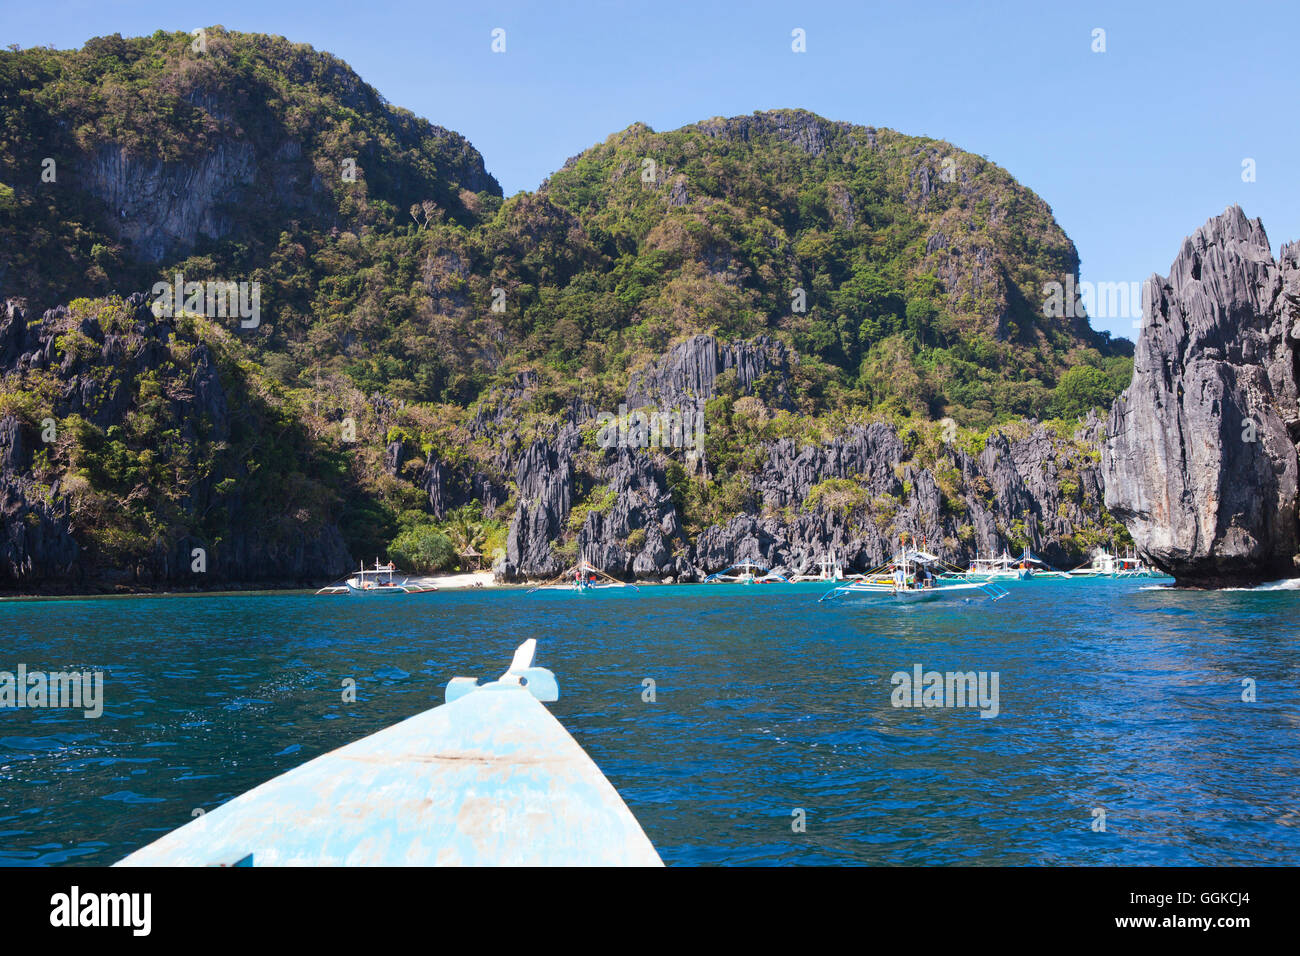 Excursion boats in the Archipelago Bacuit near El Nido, Palawan Island, South China Sea, Philippines, Asia Stock Photo